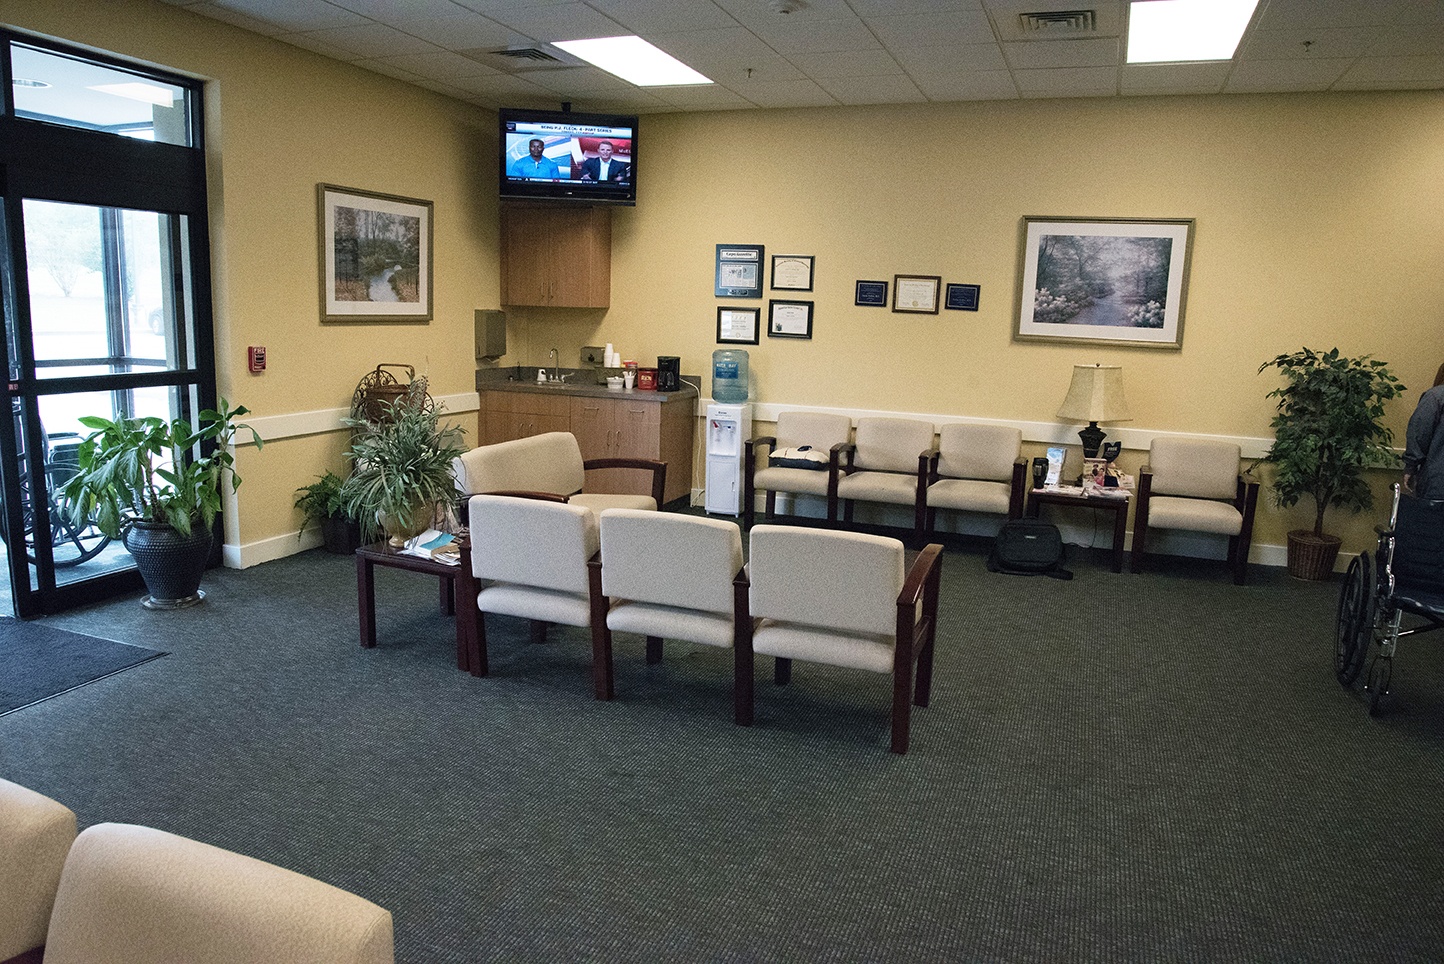 Waiting Room at Cancer Care Center of Anniston